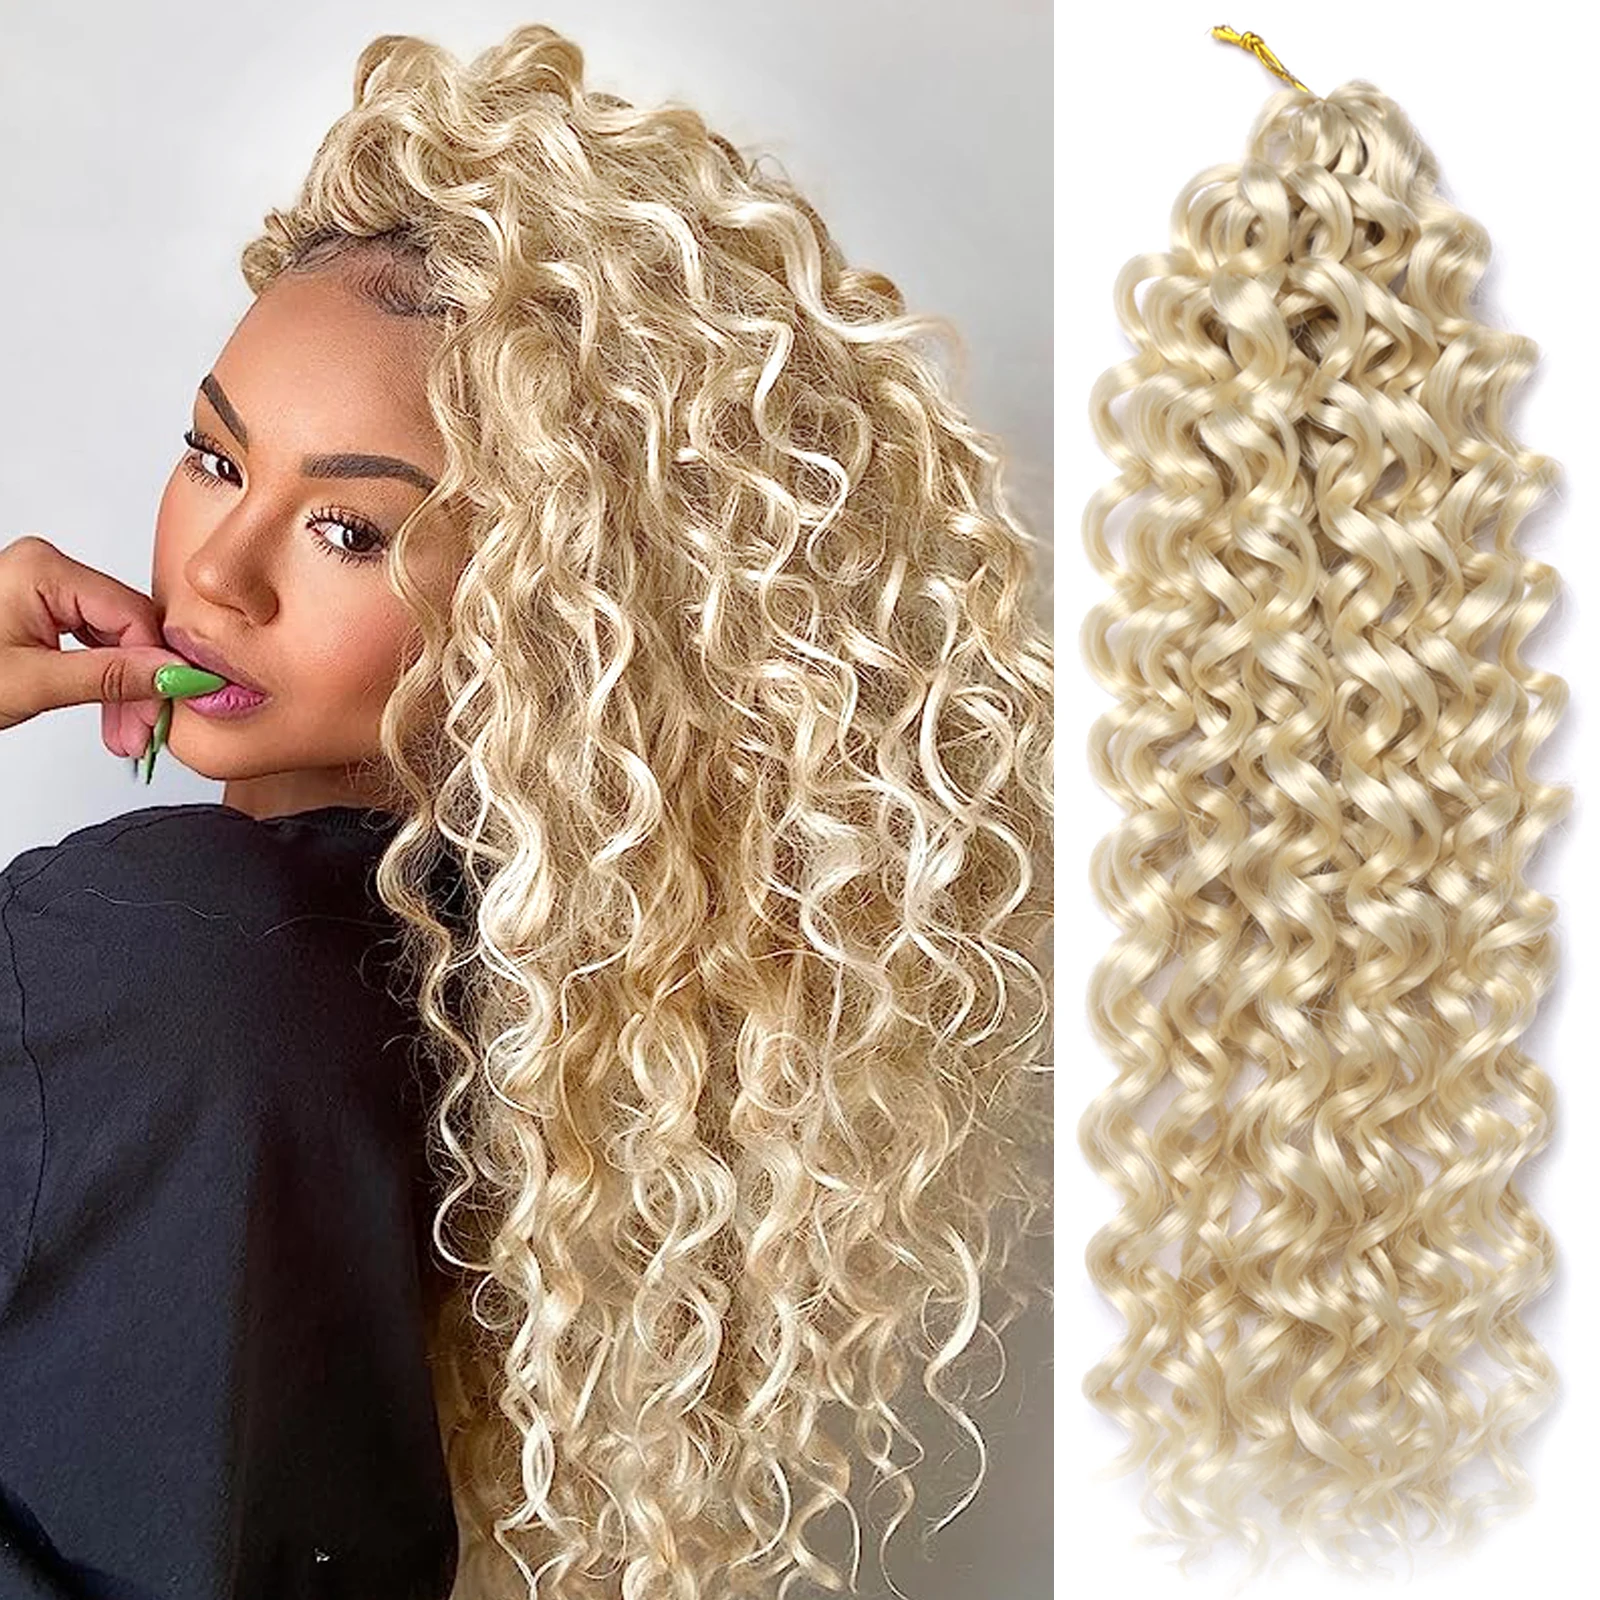 Amir Gogo Curl One Piece Synthetic Crochet Braids Hair Curly Braiding Hair Water Wave Hair Extensions For Women